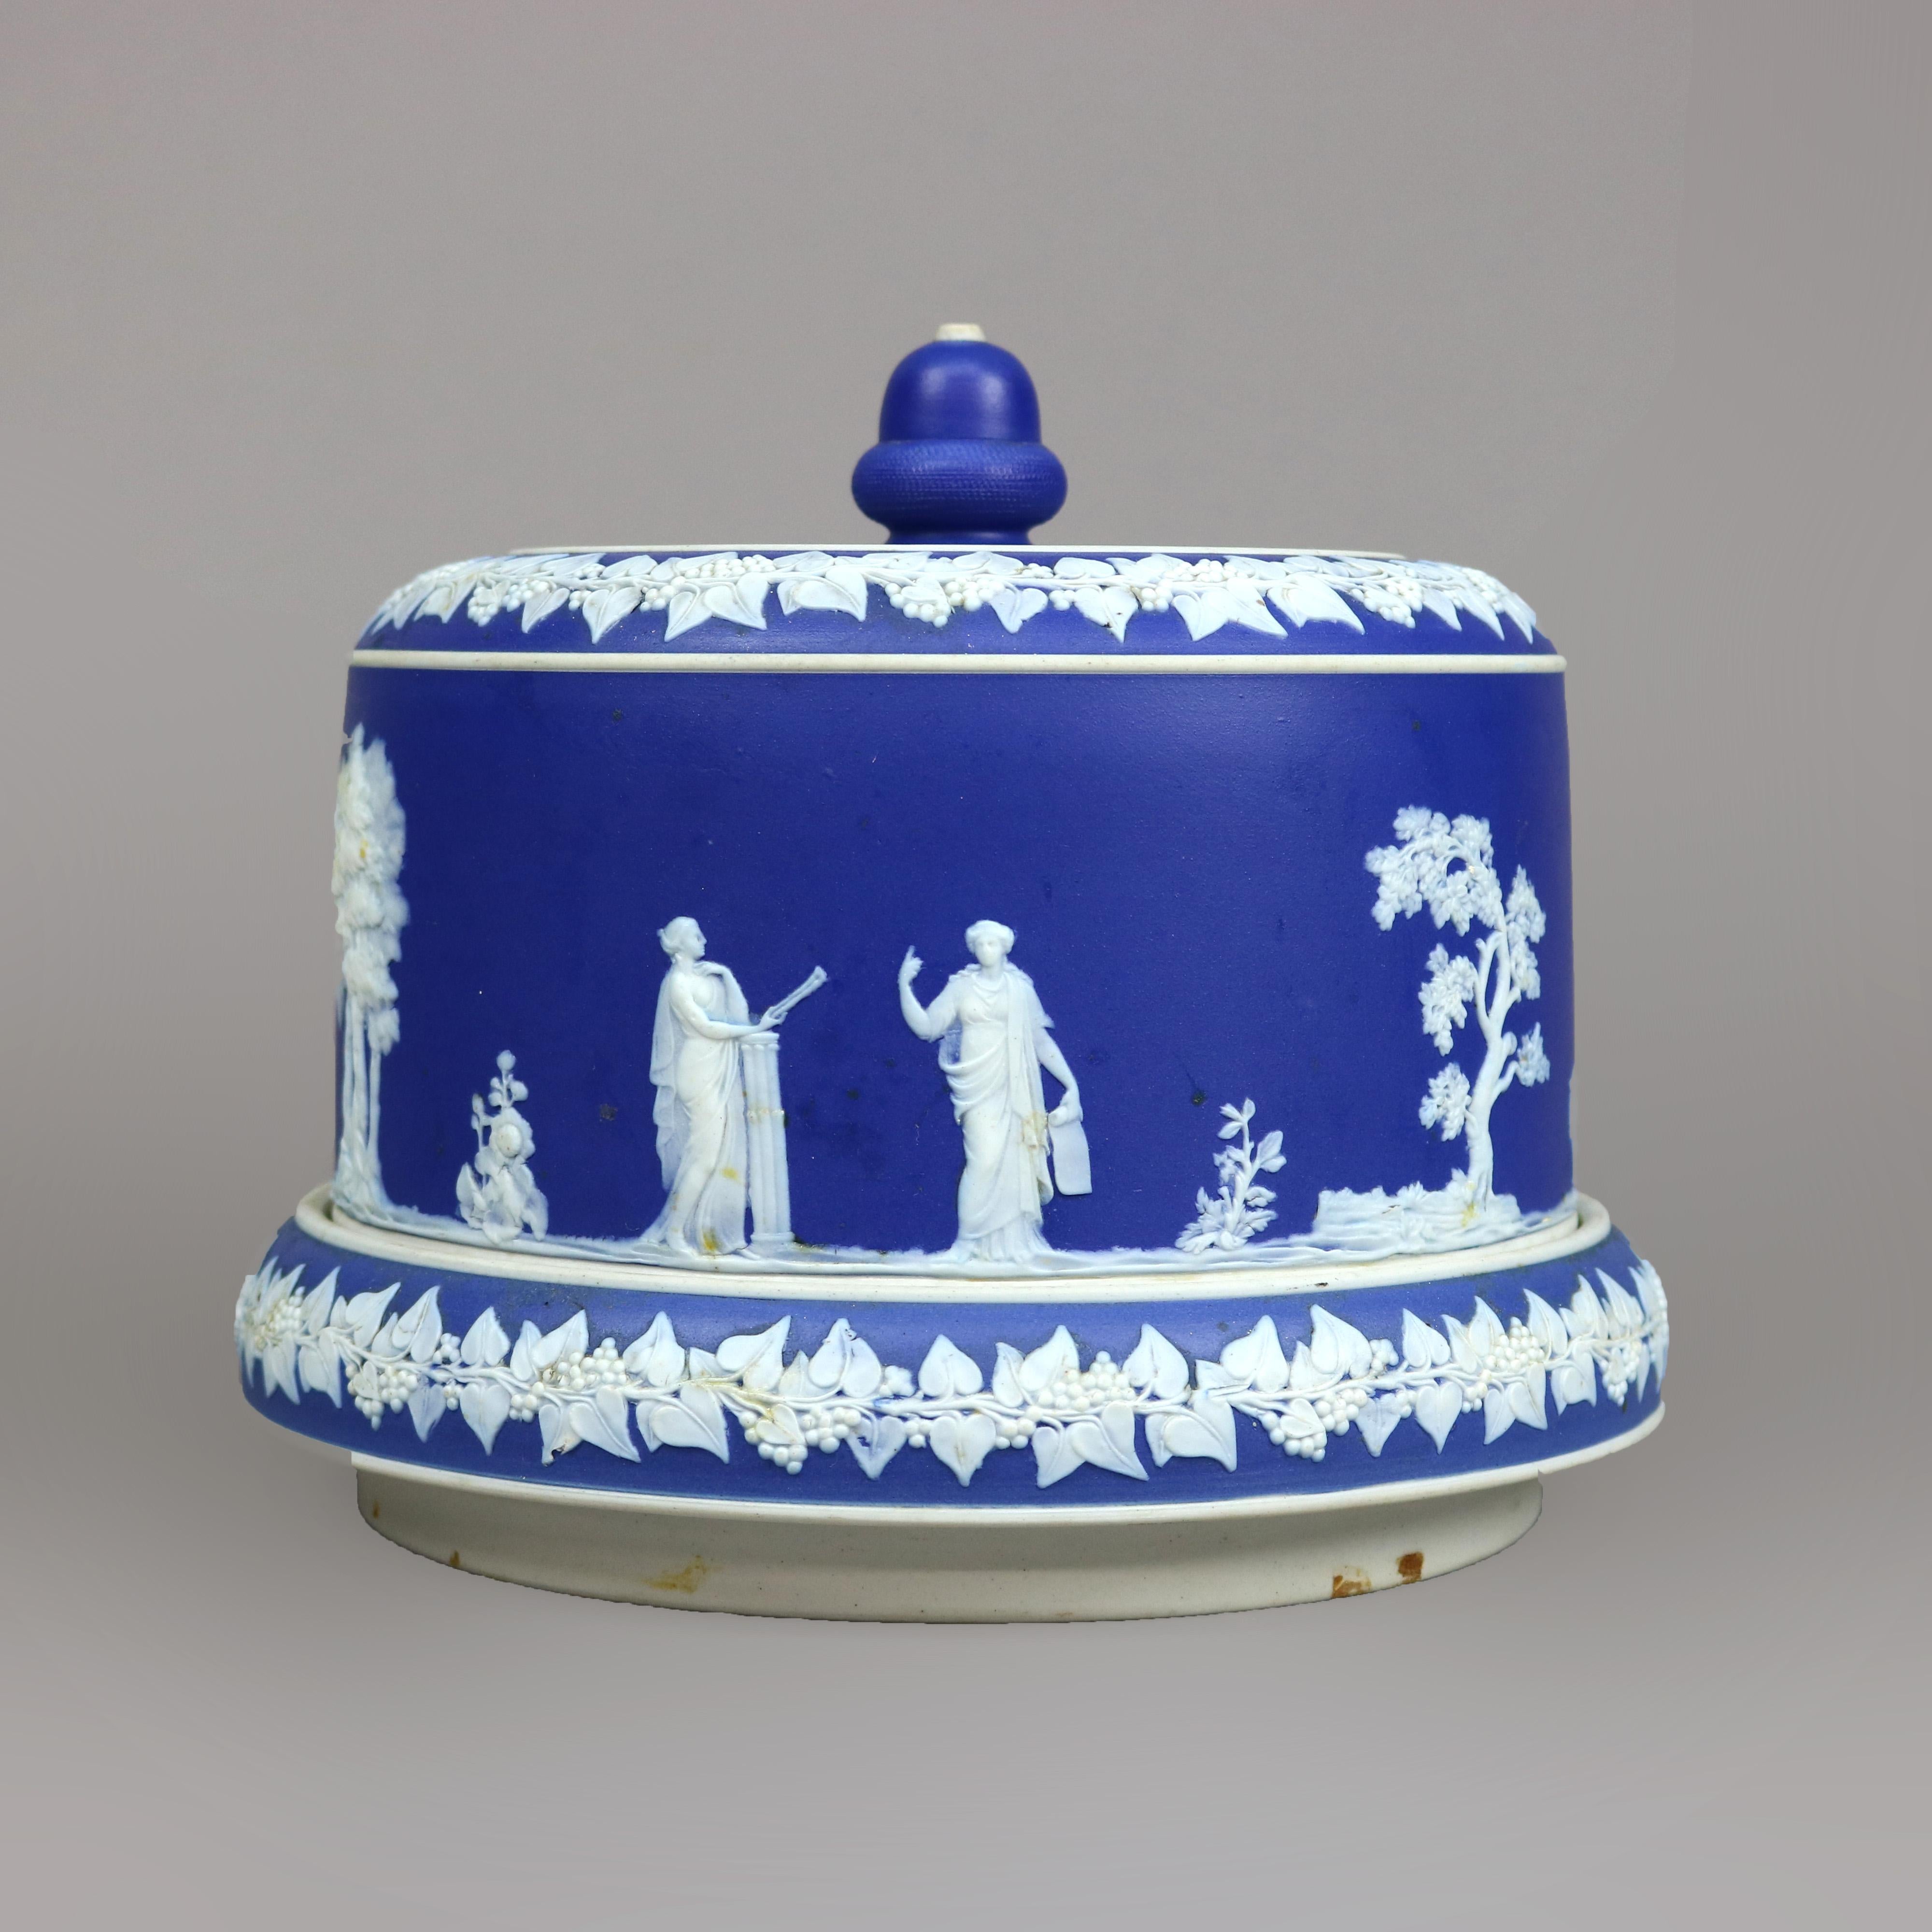 An antique and large English jasperware cheese keeper in the attributed to Wedgwood offers bisque porcelain construction with white Classical cameo scene with figures in relief on a blue ground, unmarked, 19th century

Measures - 8'' H x 9.25'' W